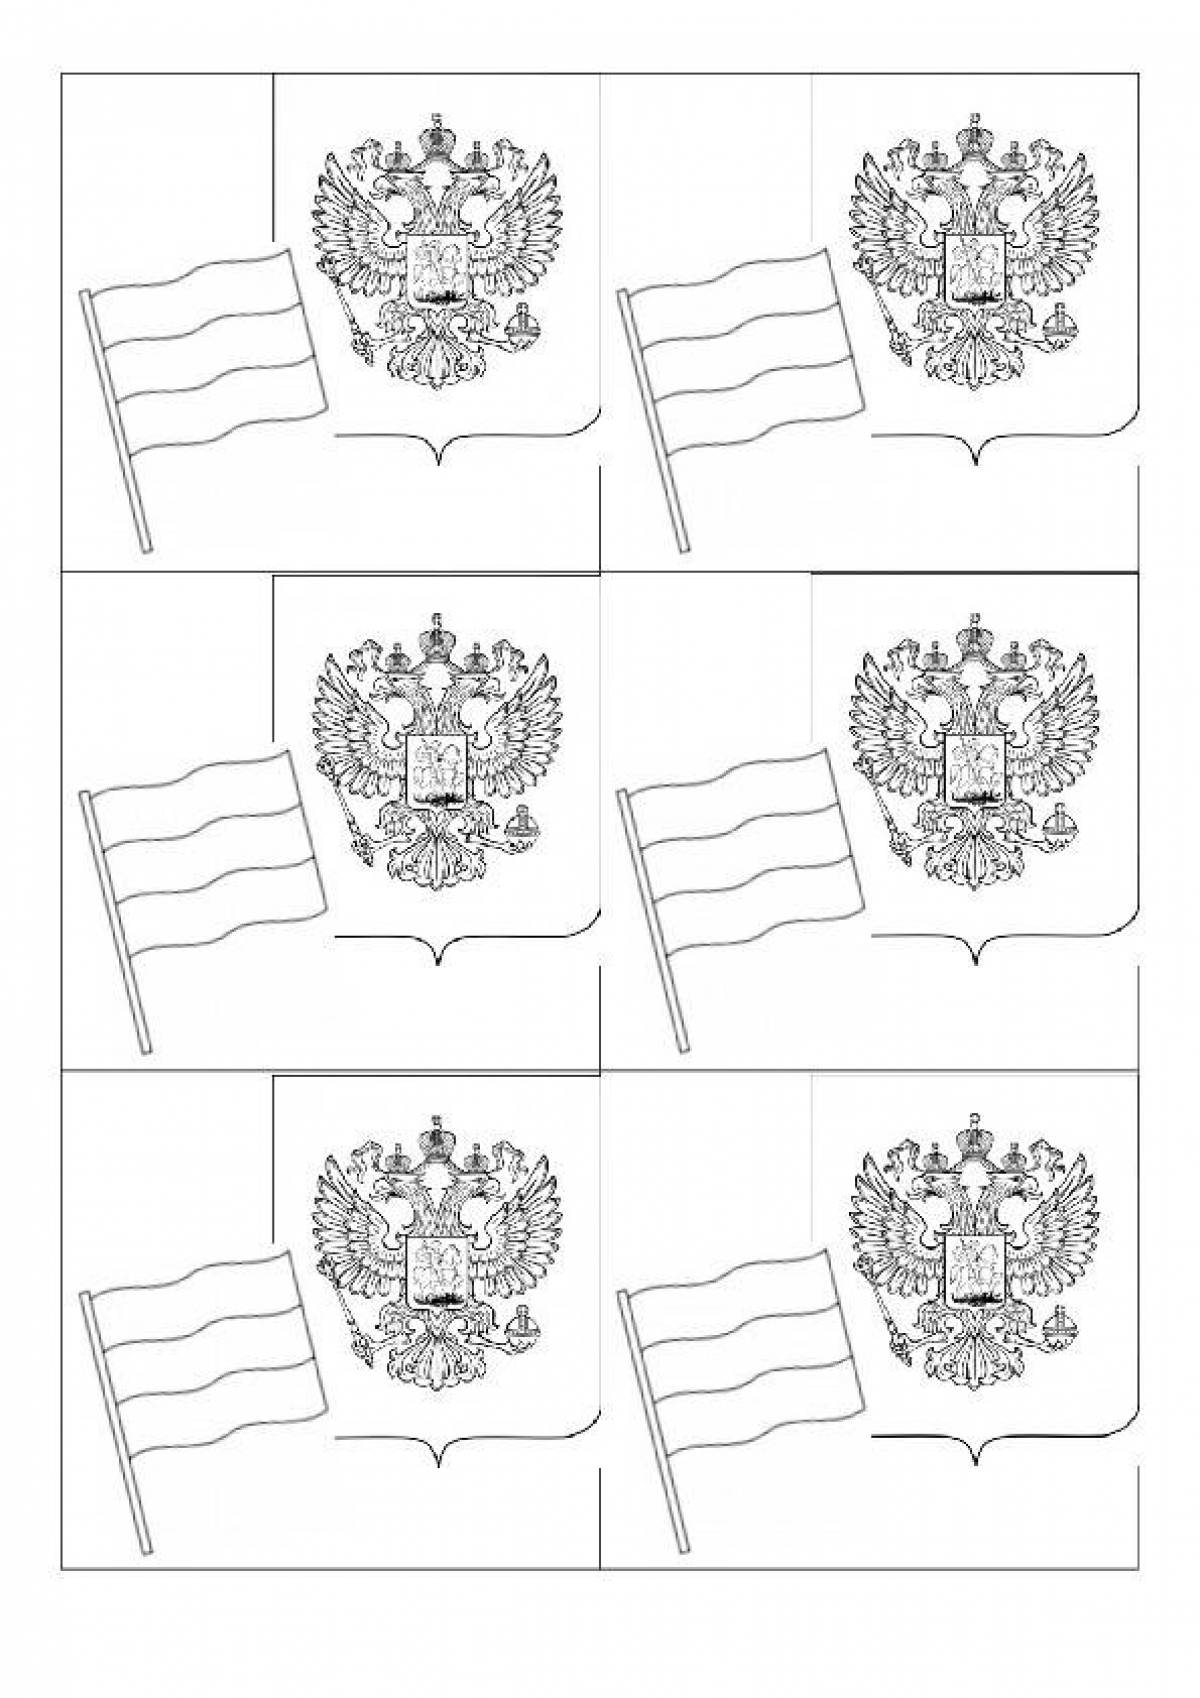 Glorious coat of arms of russia coloring page